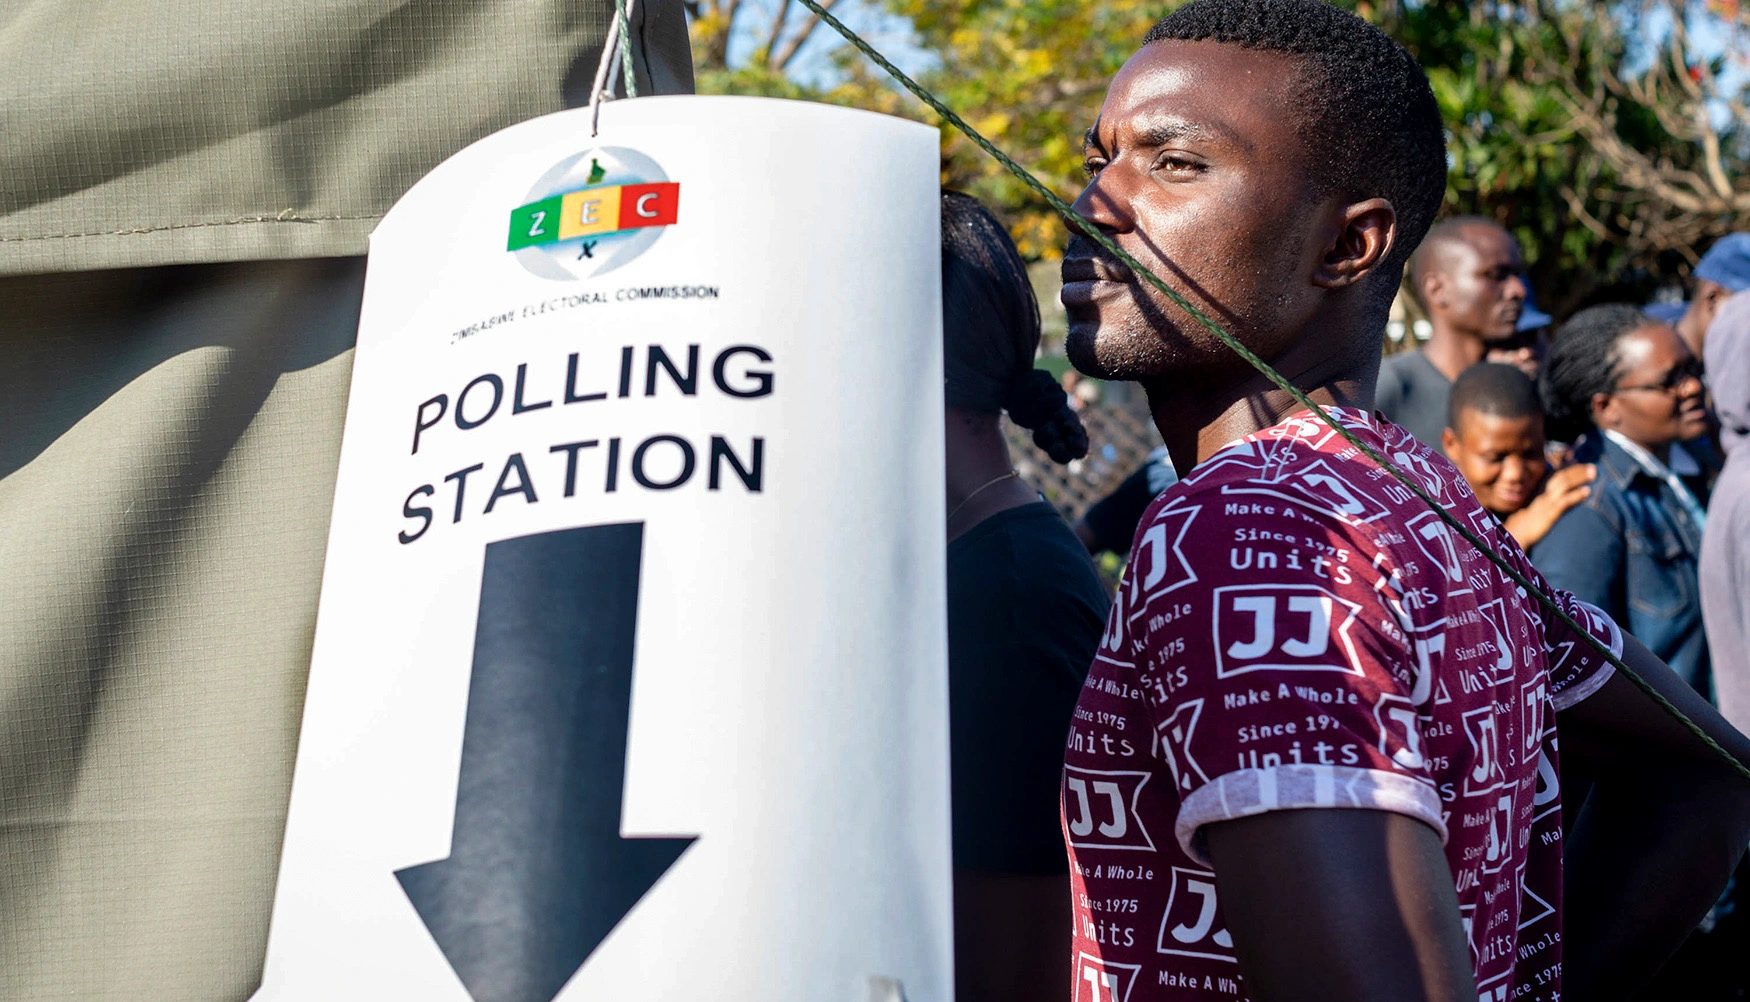 ZIMBABWE’S general elections could be postponed after an opposition leader was allowed to challenge a delimitation report produced by the commission that runs polls at the Constitutional Court (ConCourt).